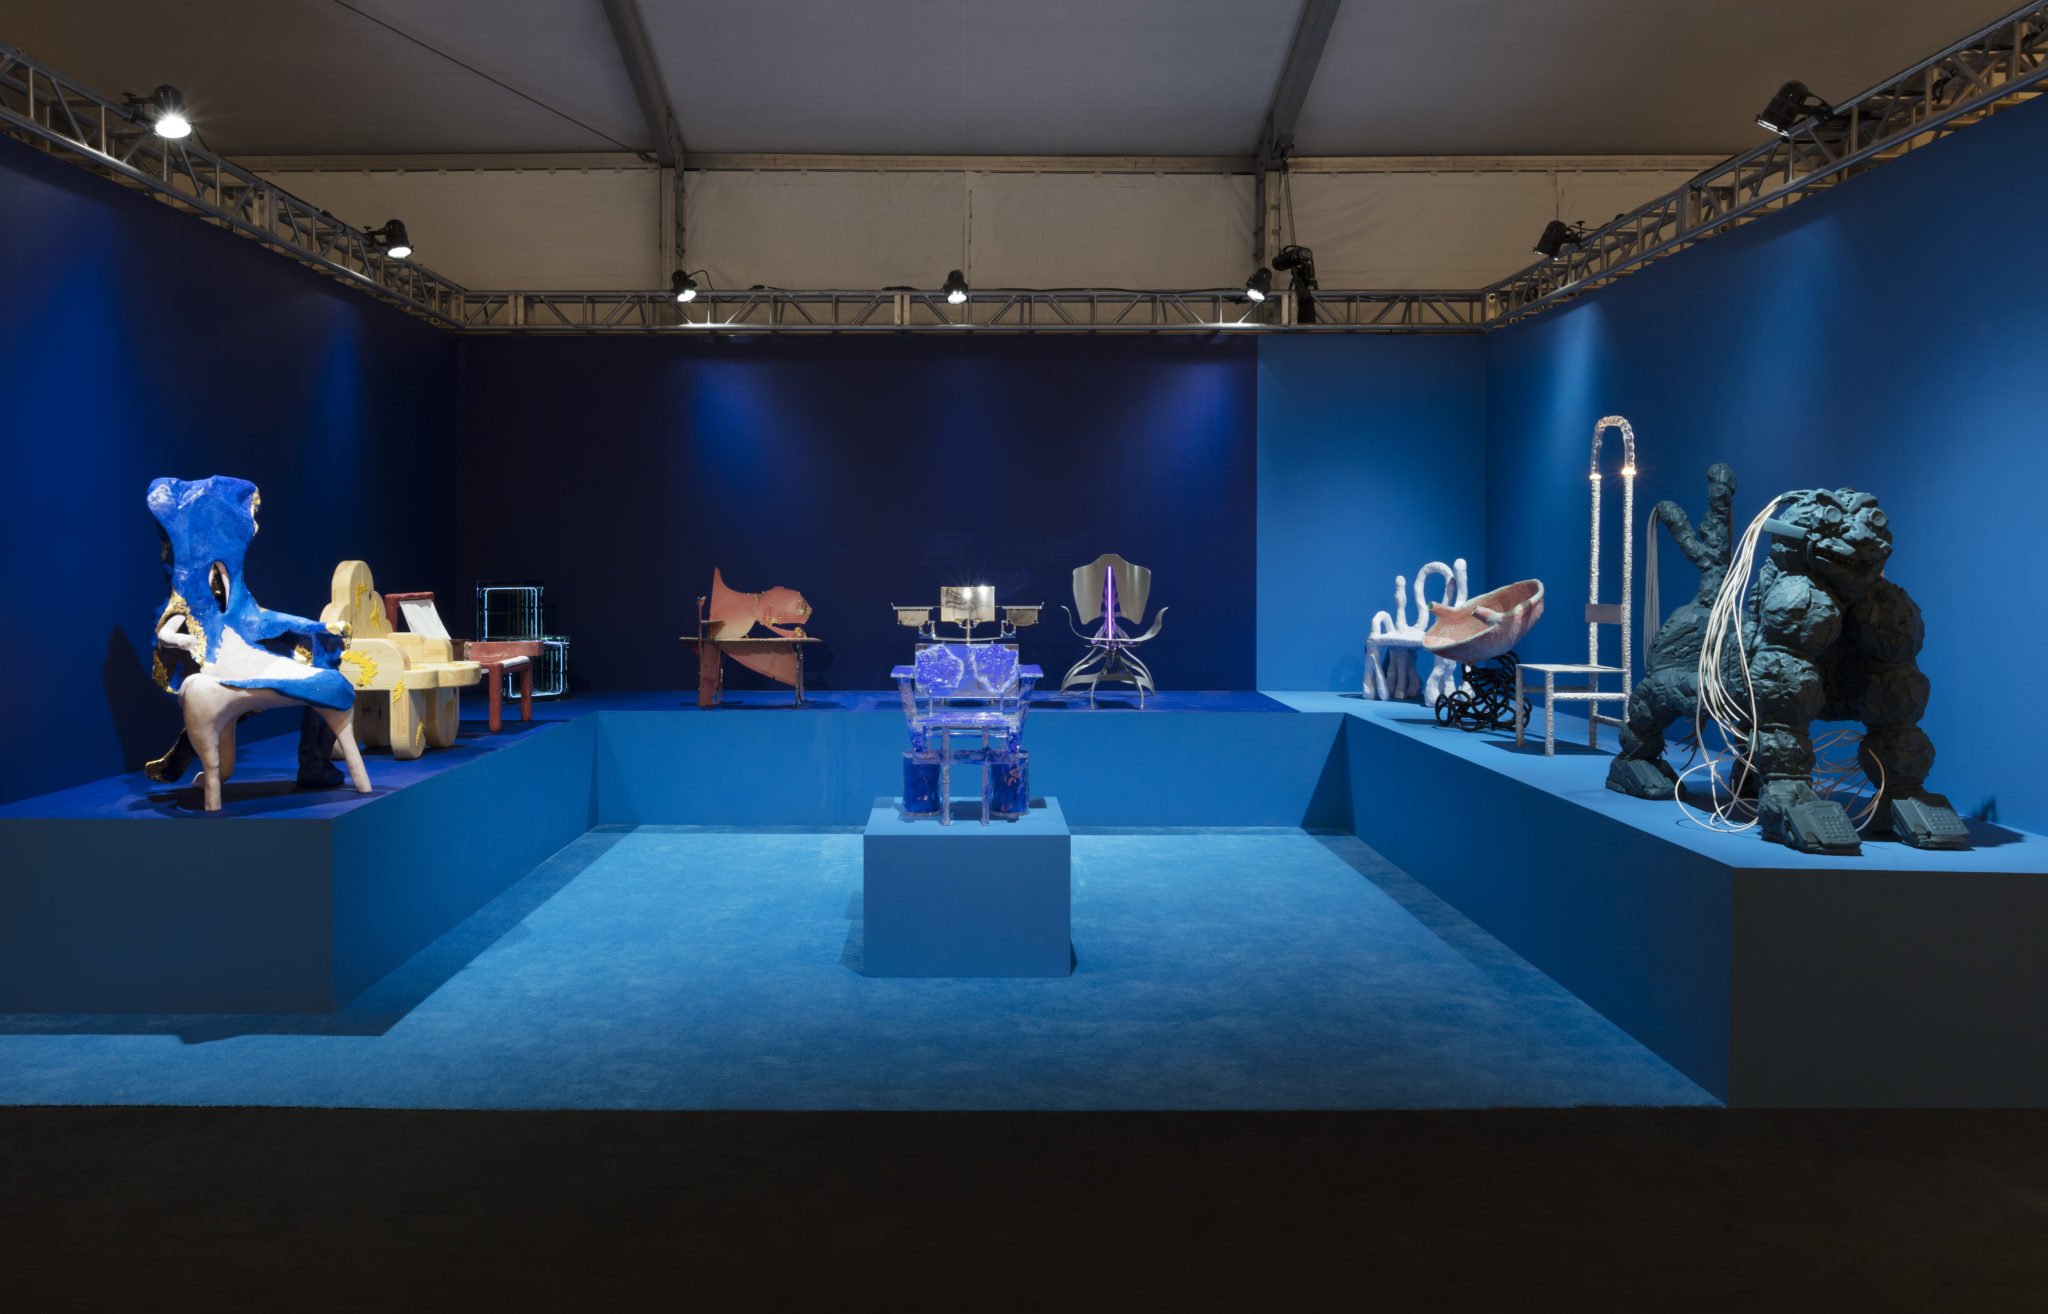 Design Miami 2019, Functional Art Gallery's booth